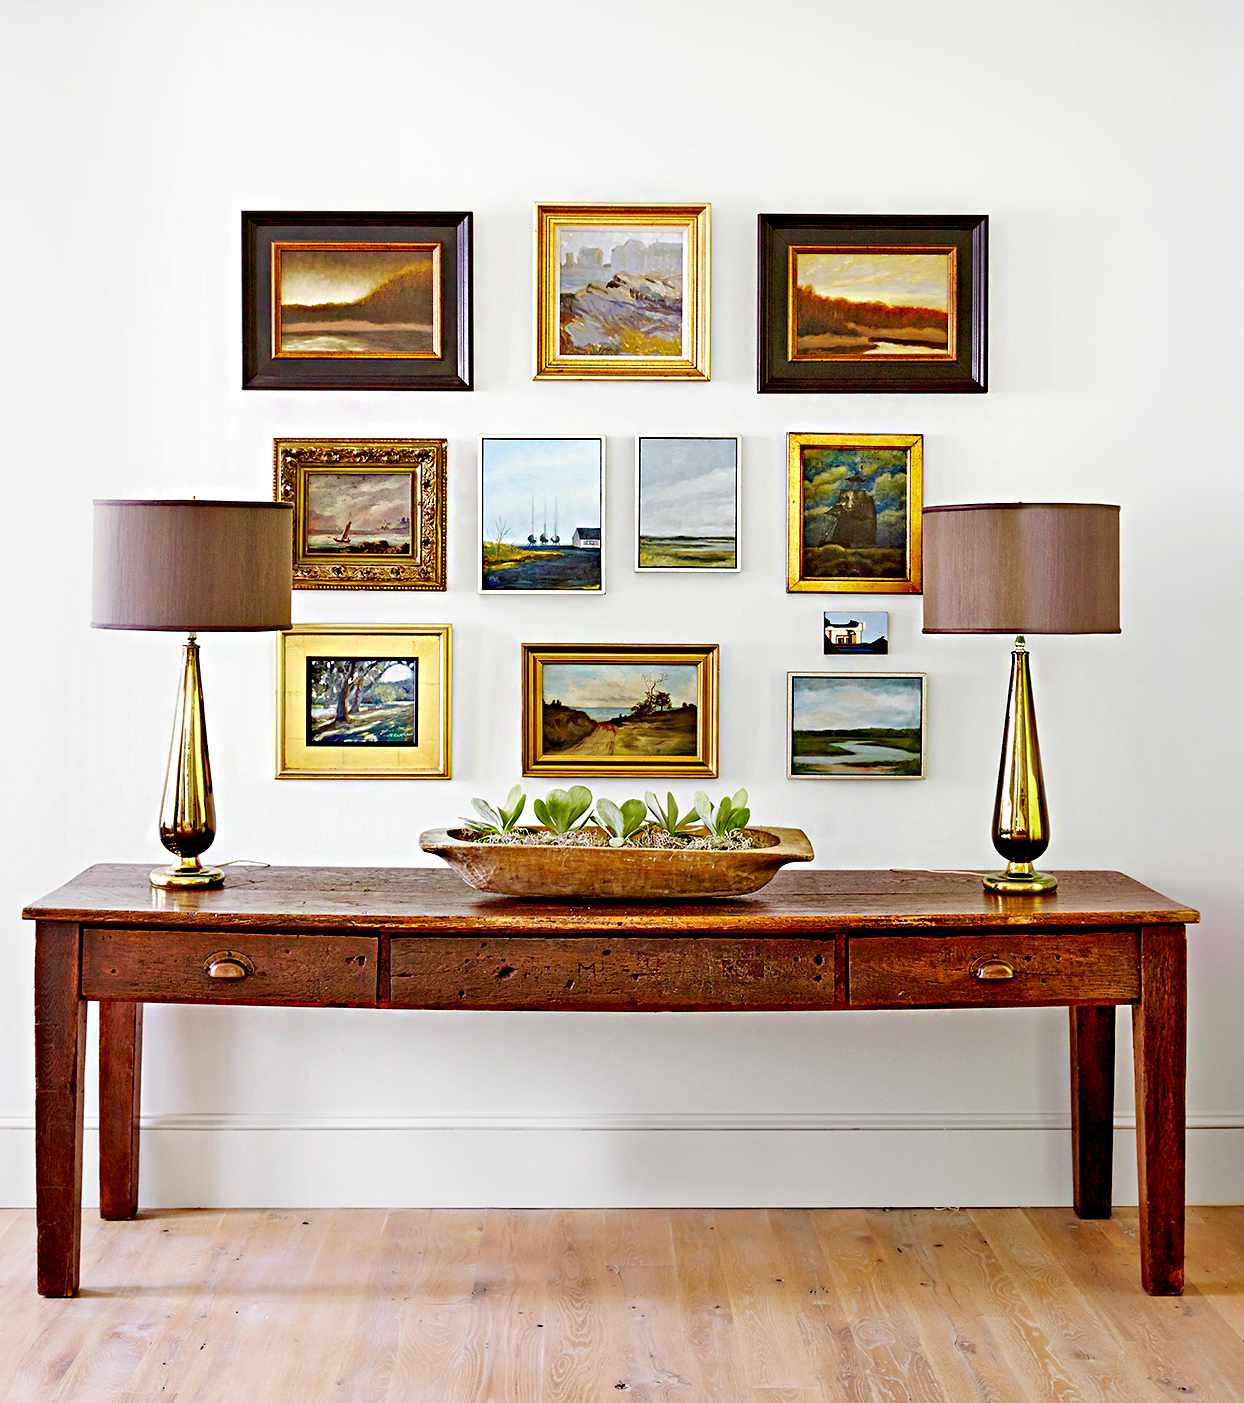 Table with lamps and multiple framed landscapes